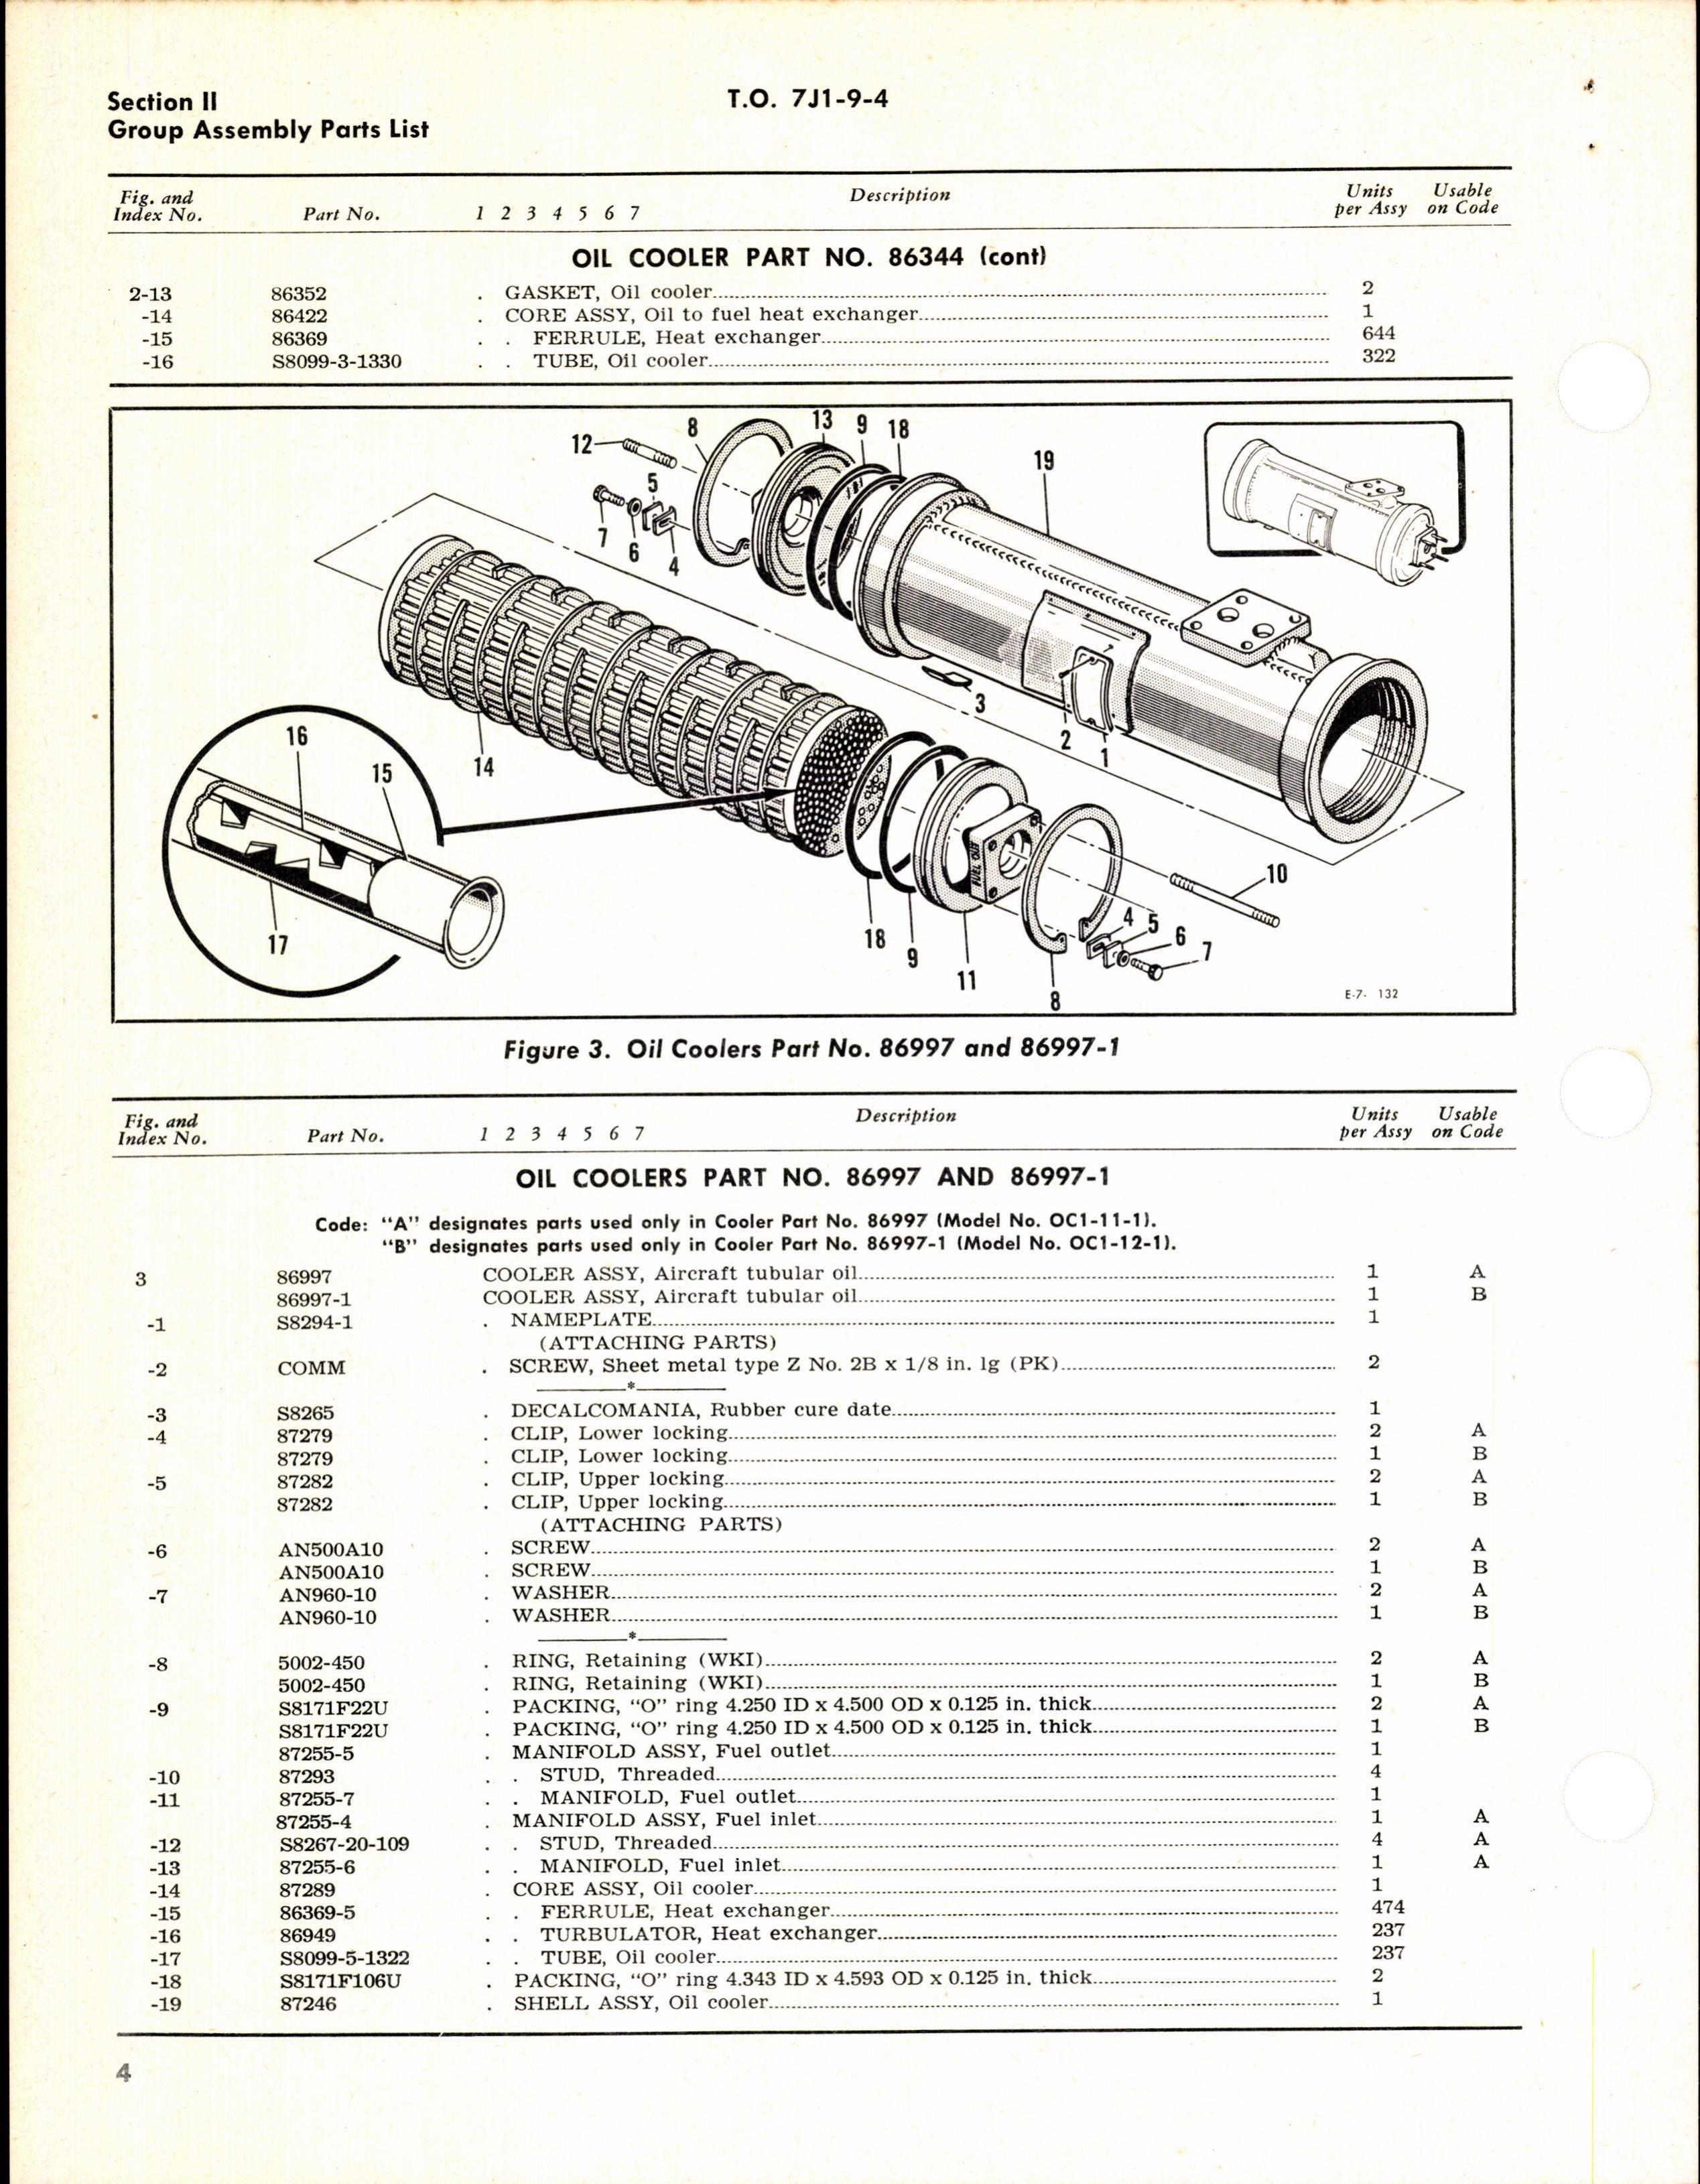 Sample page 6 from AirCorps Library document: Illustrated Parts Breakdown for Oil Coolers